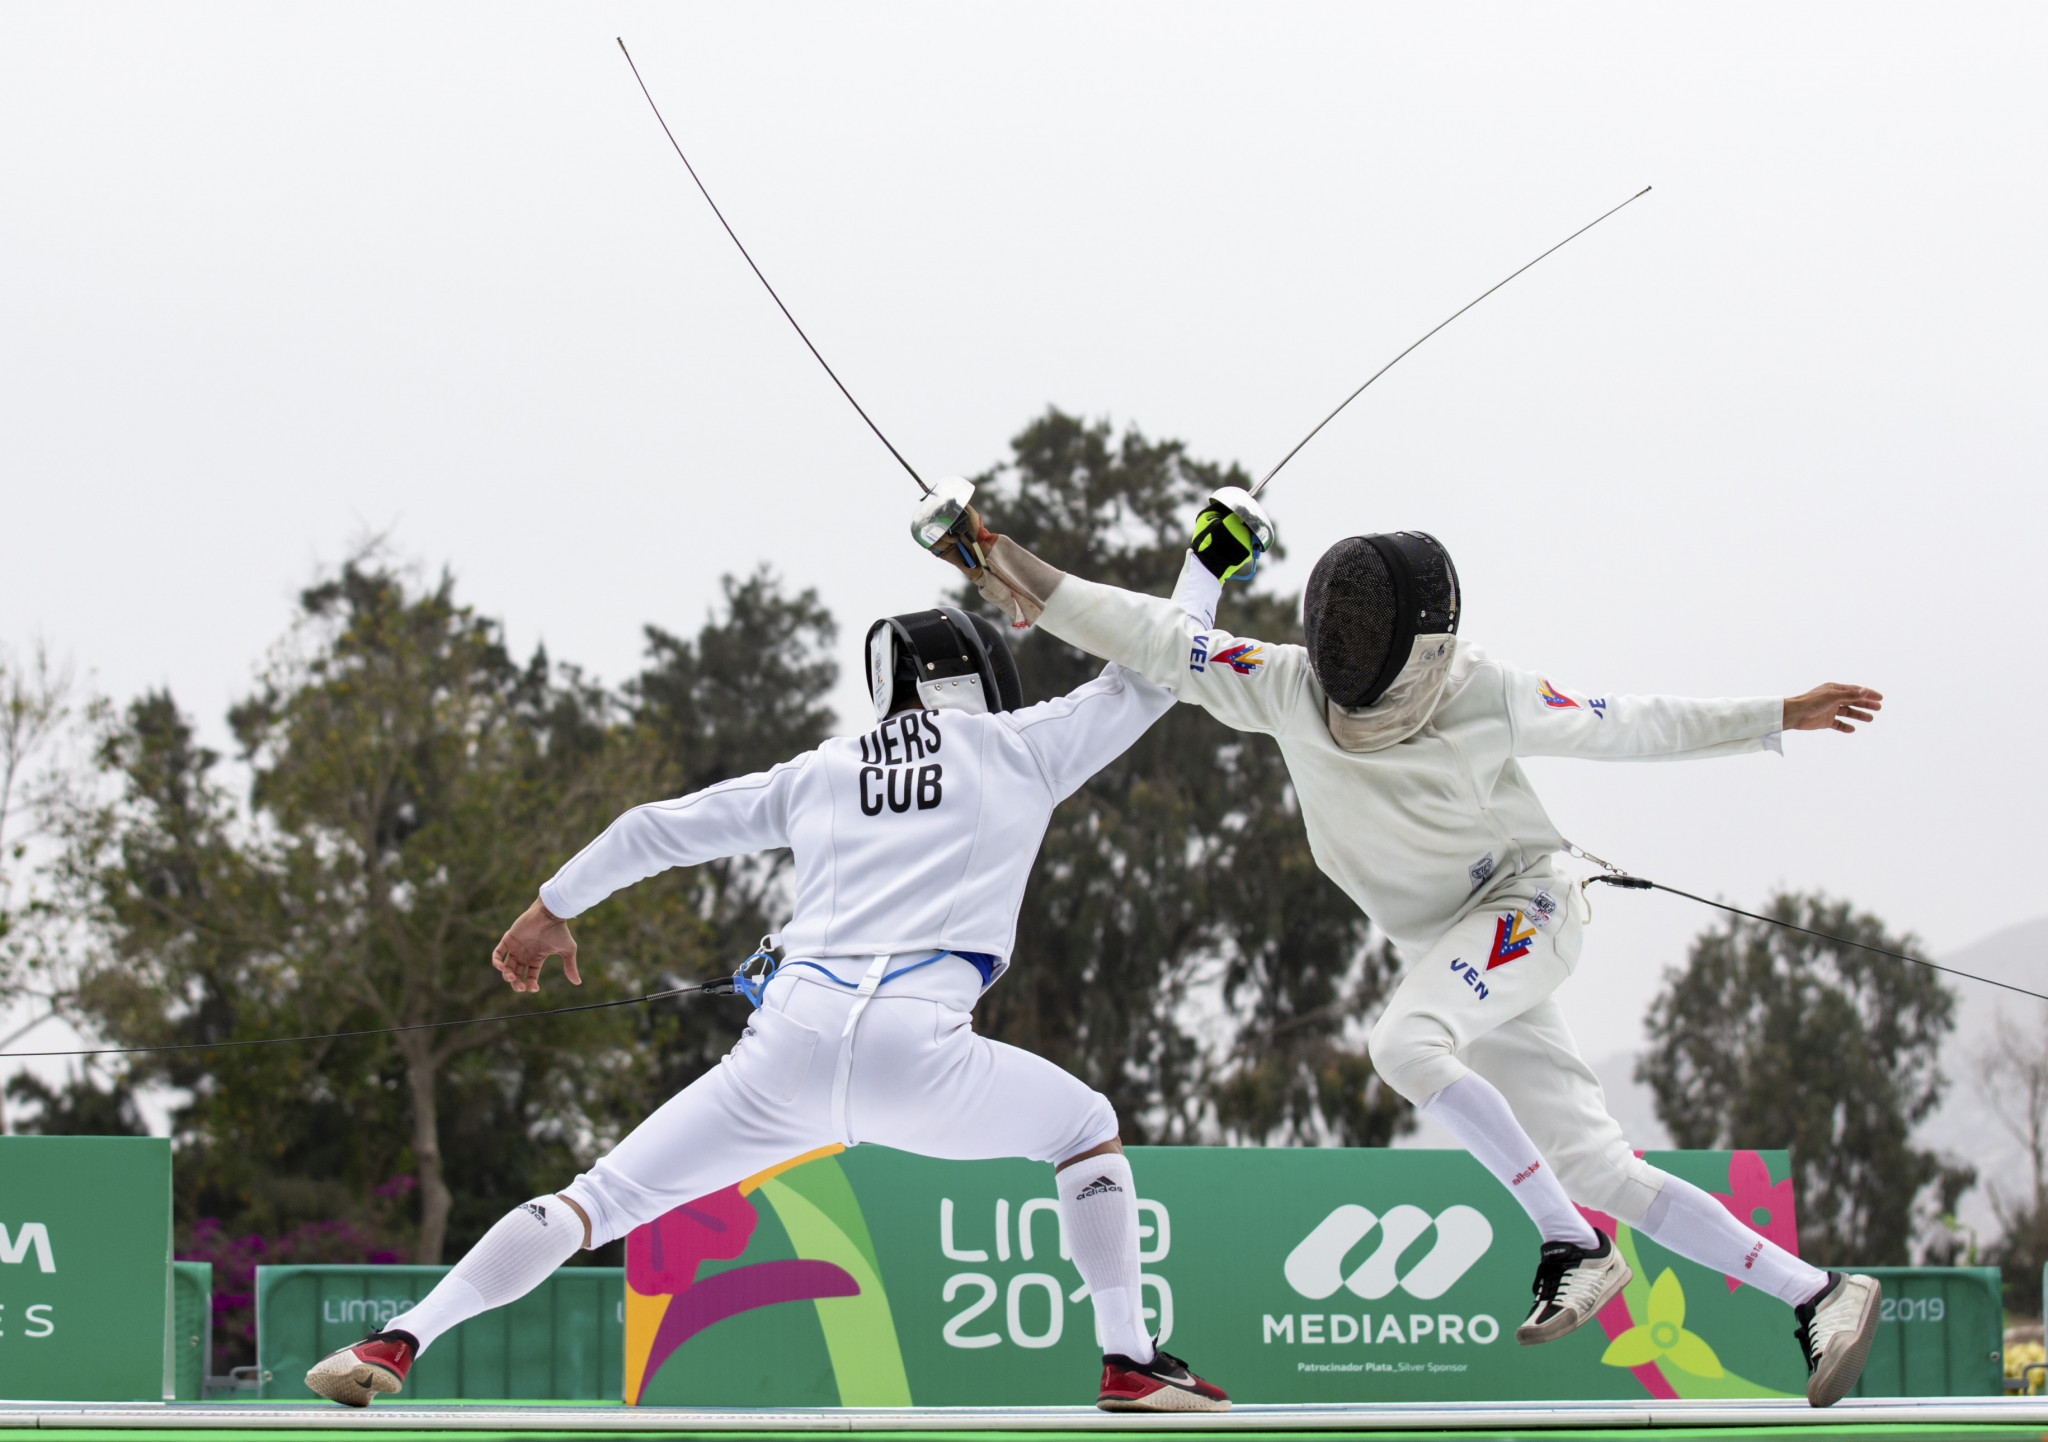 The men's modern pentathlon was contested in disciplines such as fencing ©Lima 2019